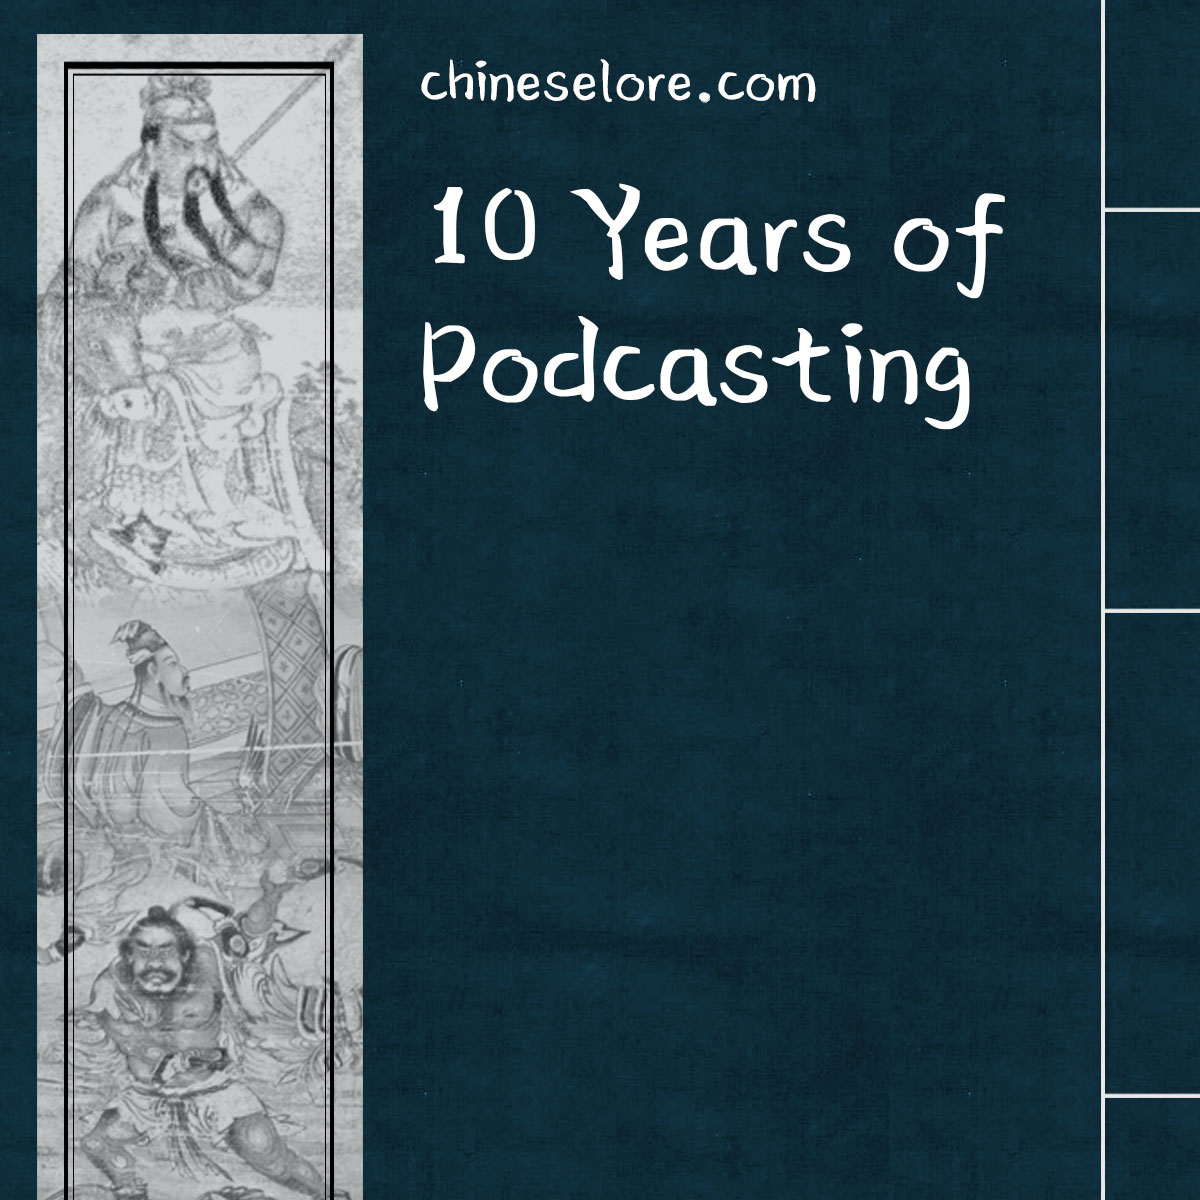 10 Years of Podcasting